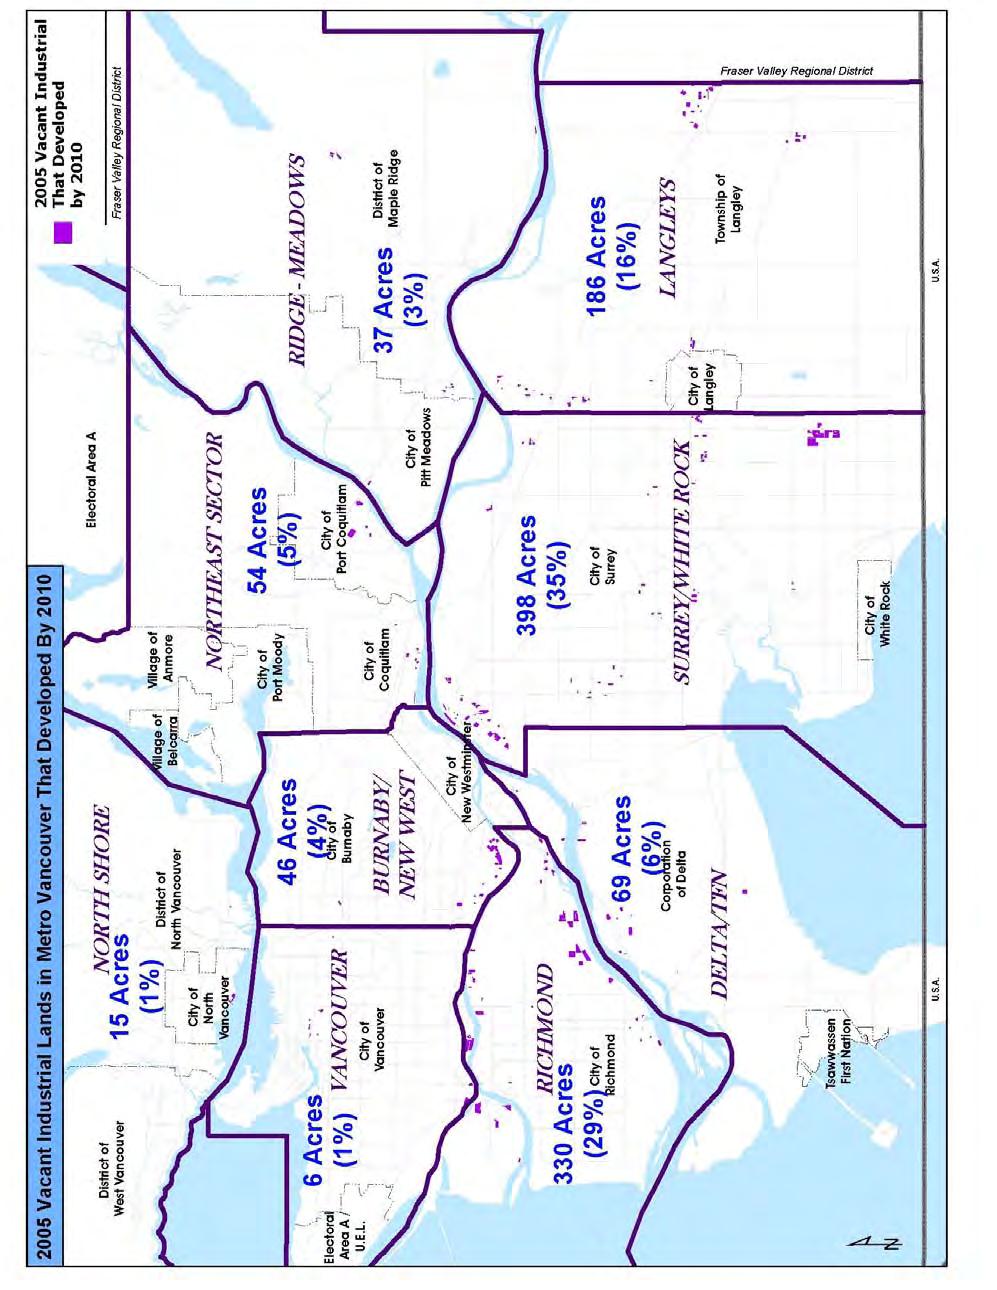 Figure 4-10: Map of 2005 Vacant Lands in Metro Vancouver that